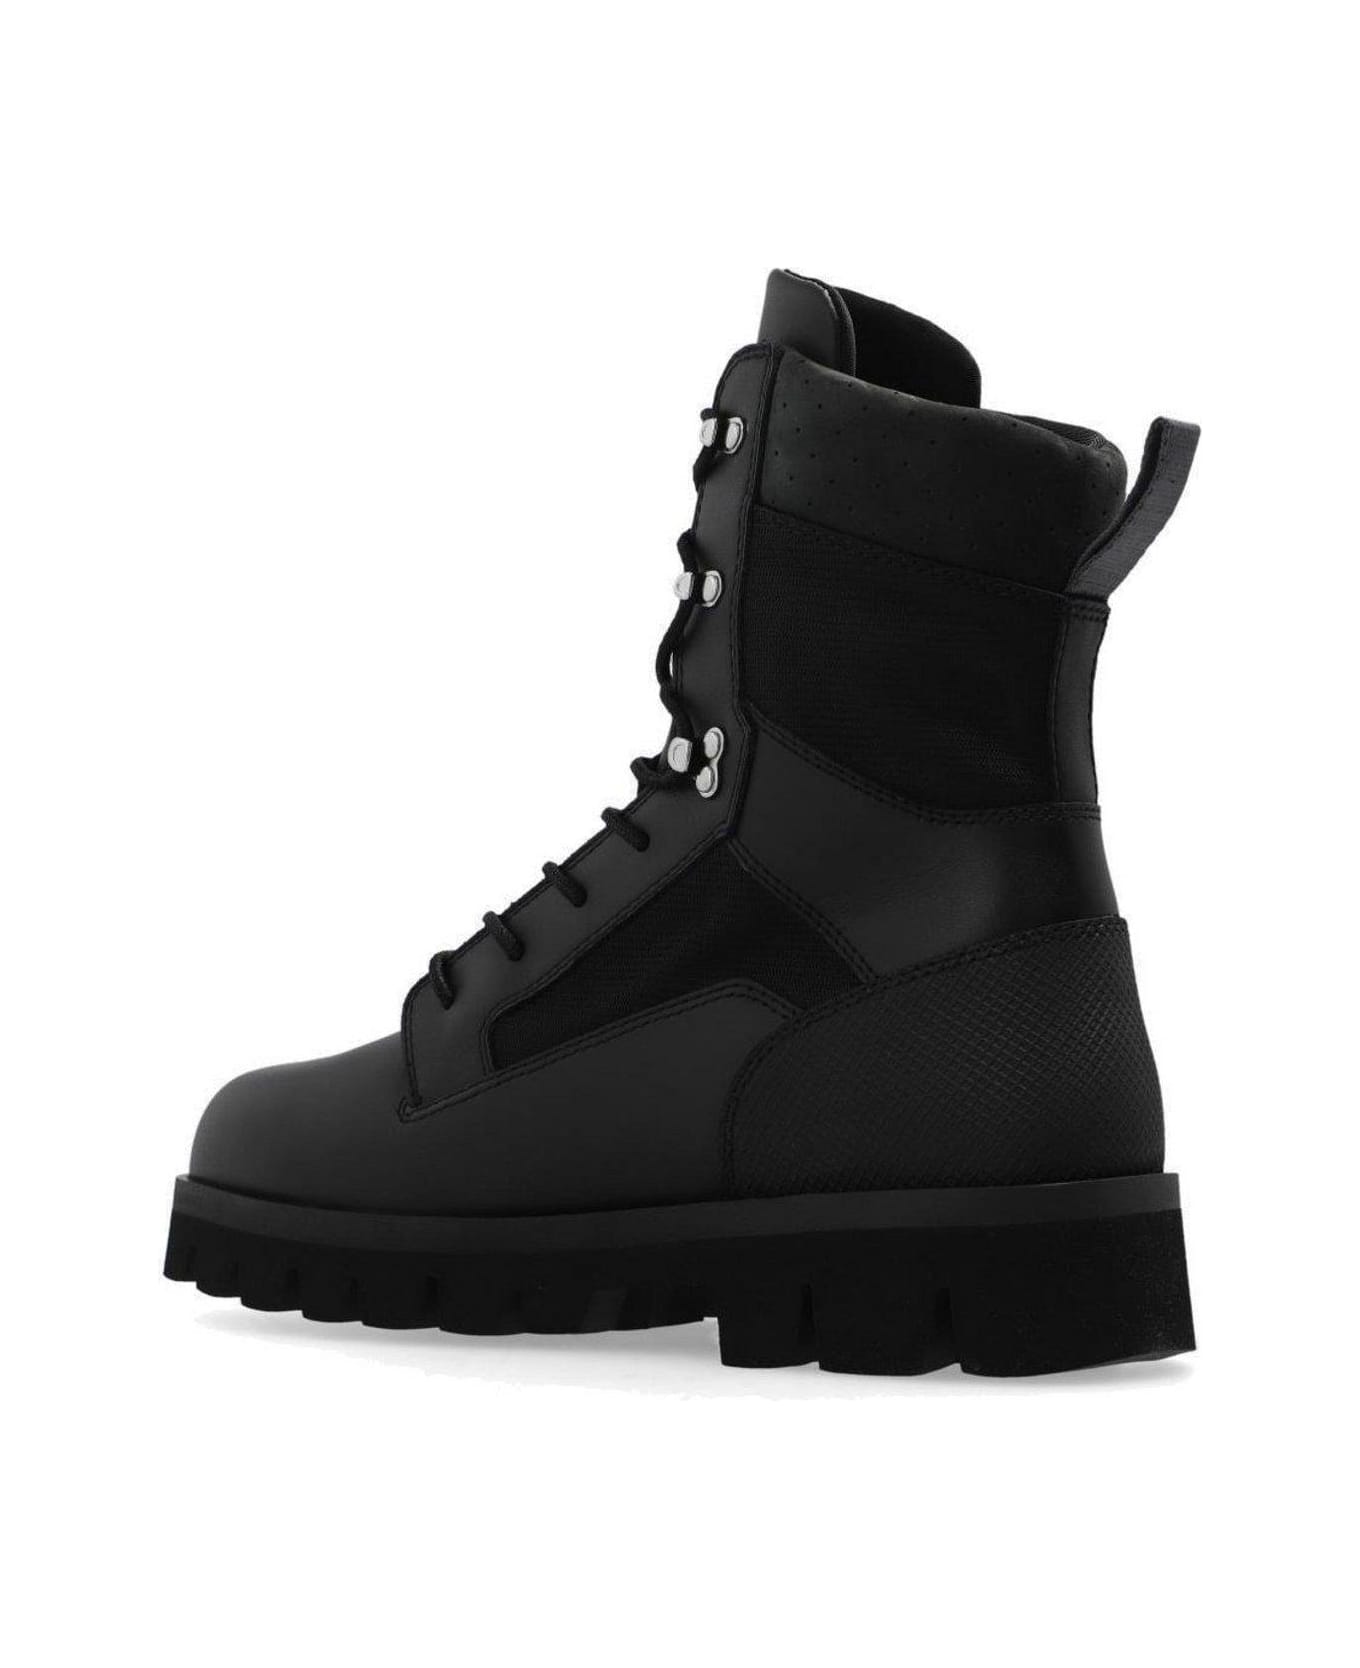 HERON PRESTON Military Lace-up Ankle Boots - Black ブーツ